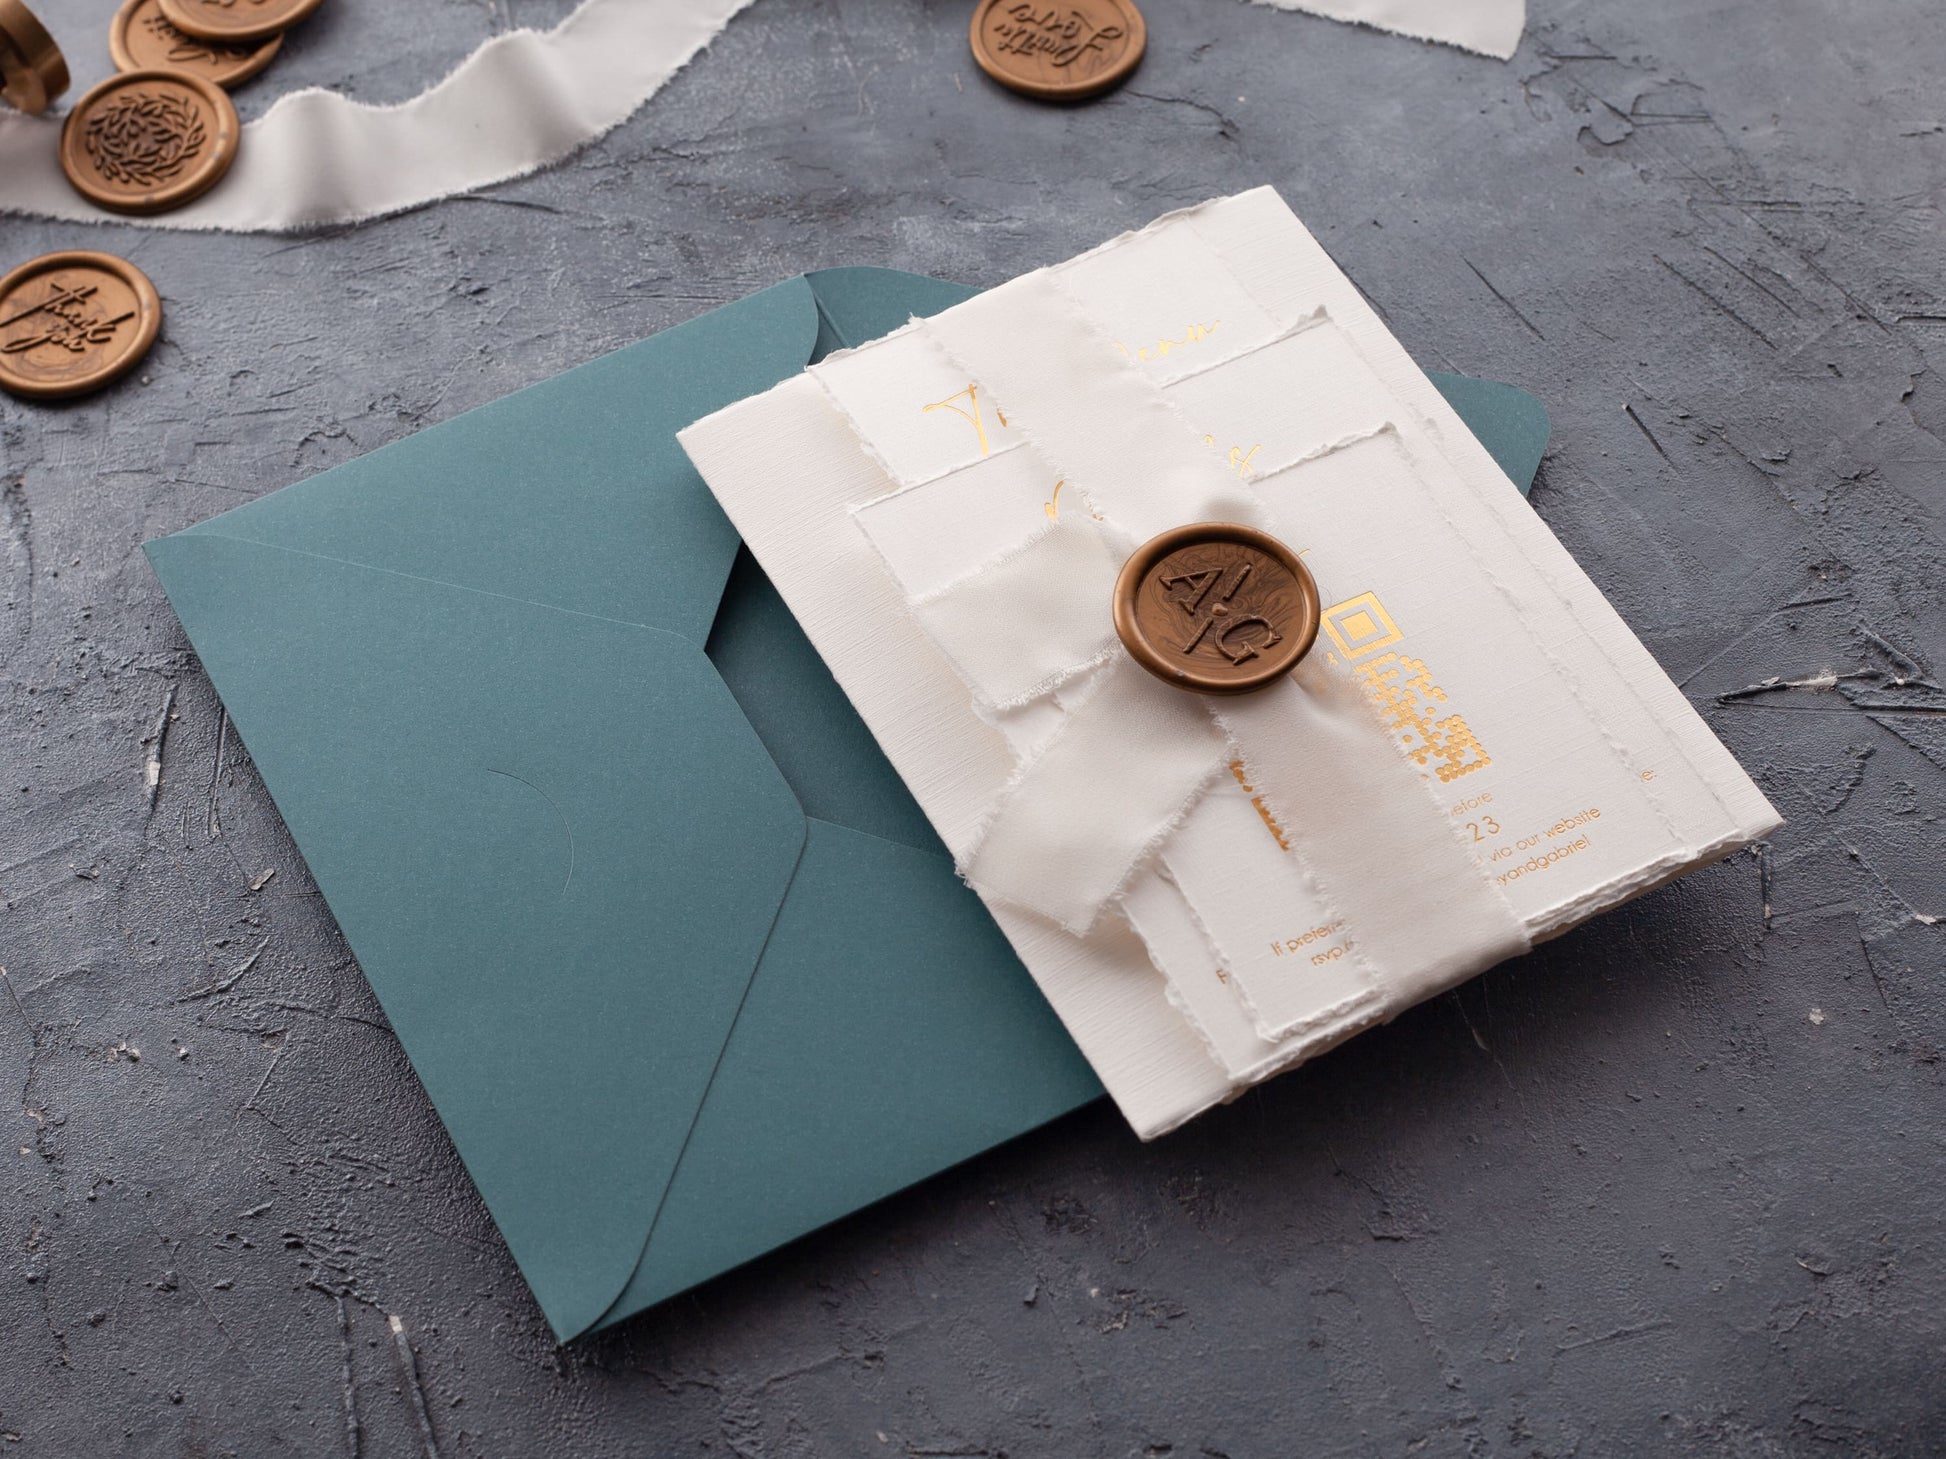 Deckled edge wedding invitation with ribbon and wax seal